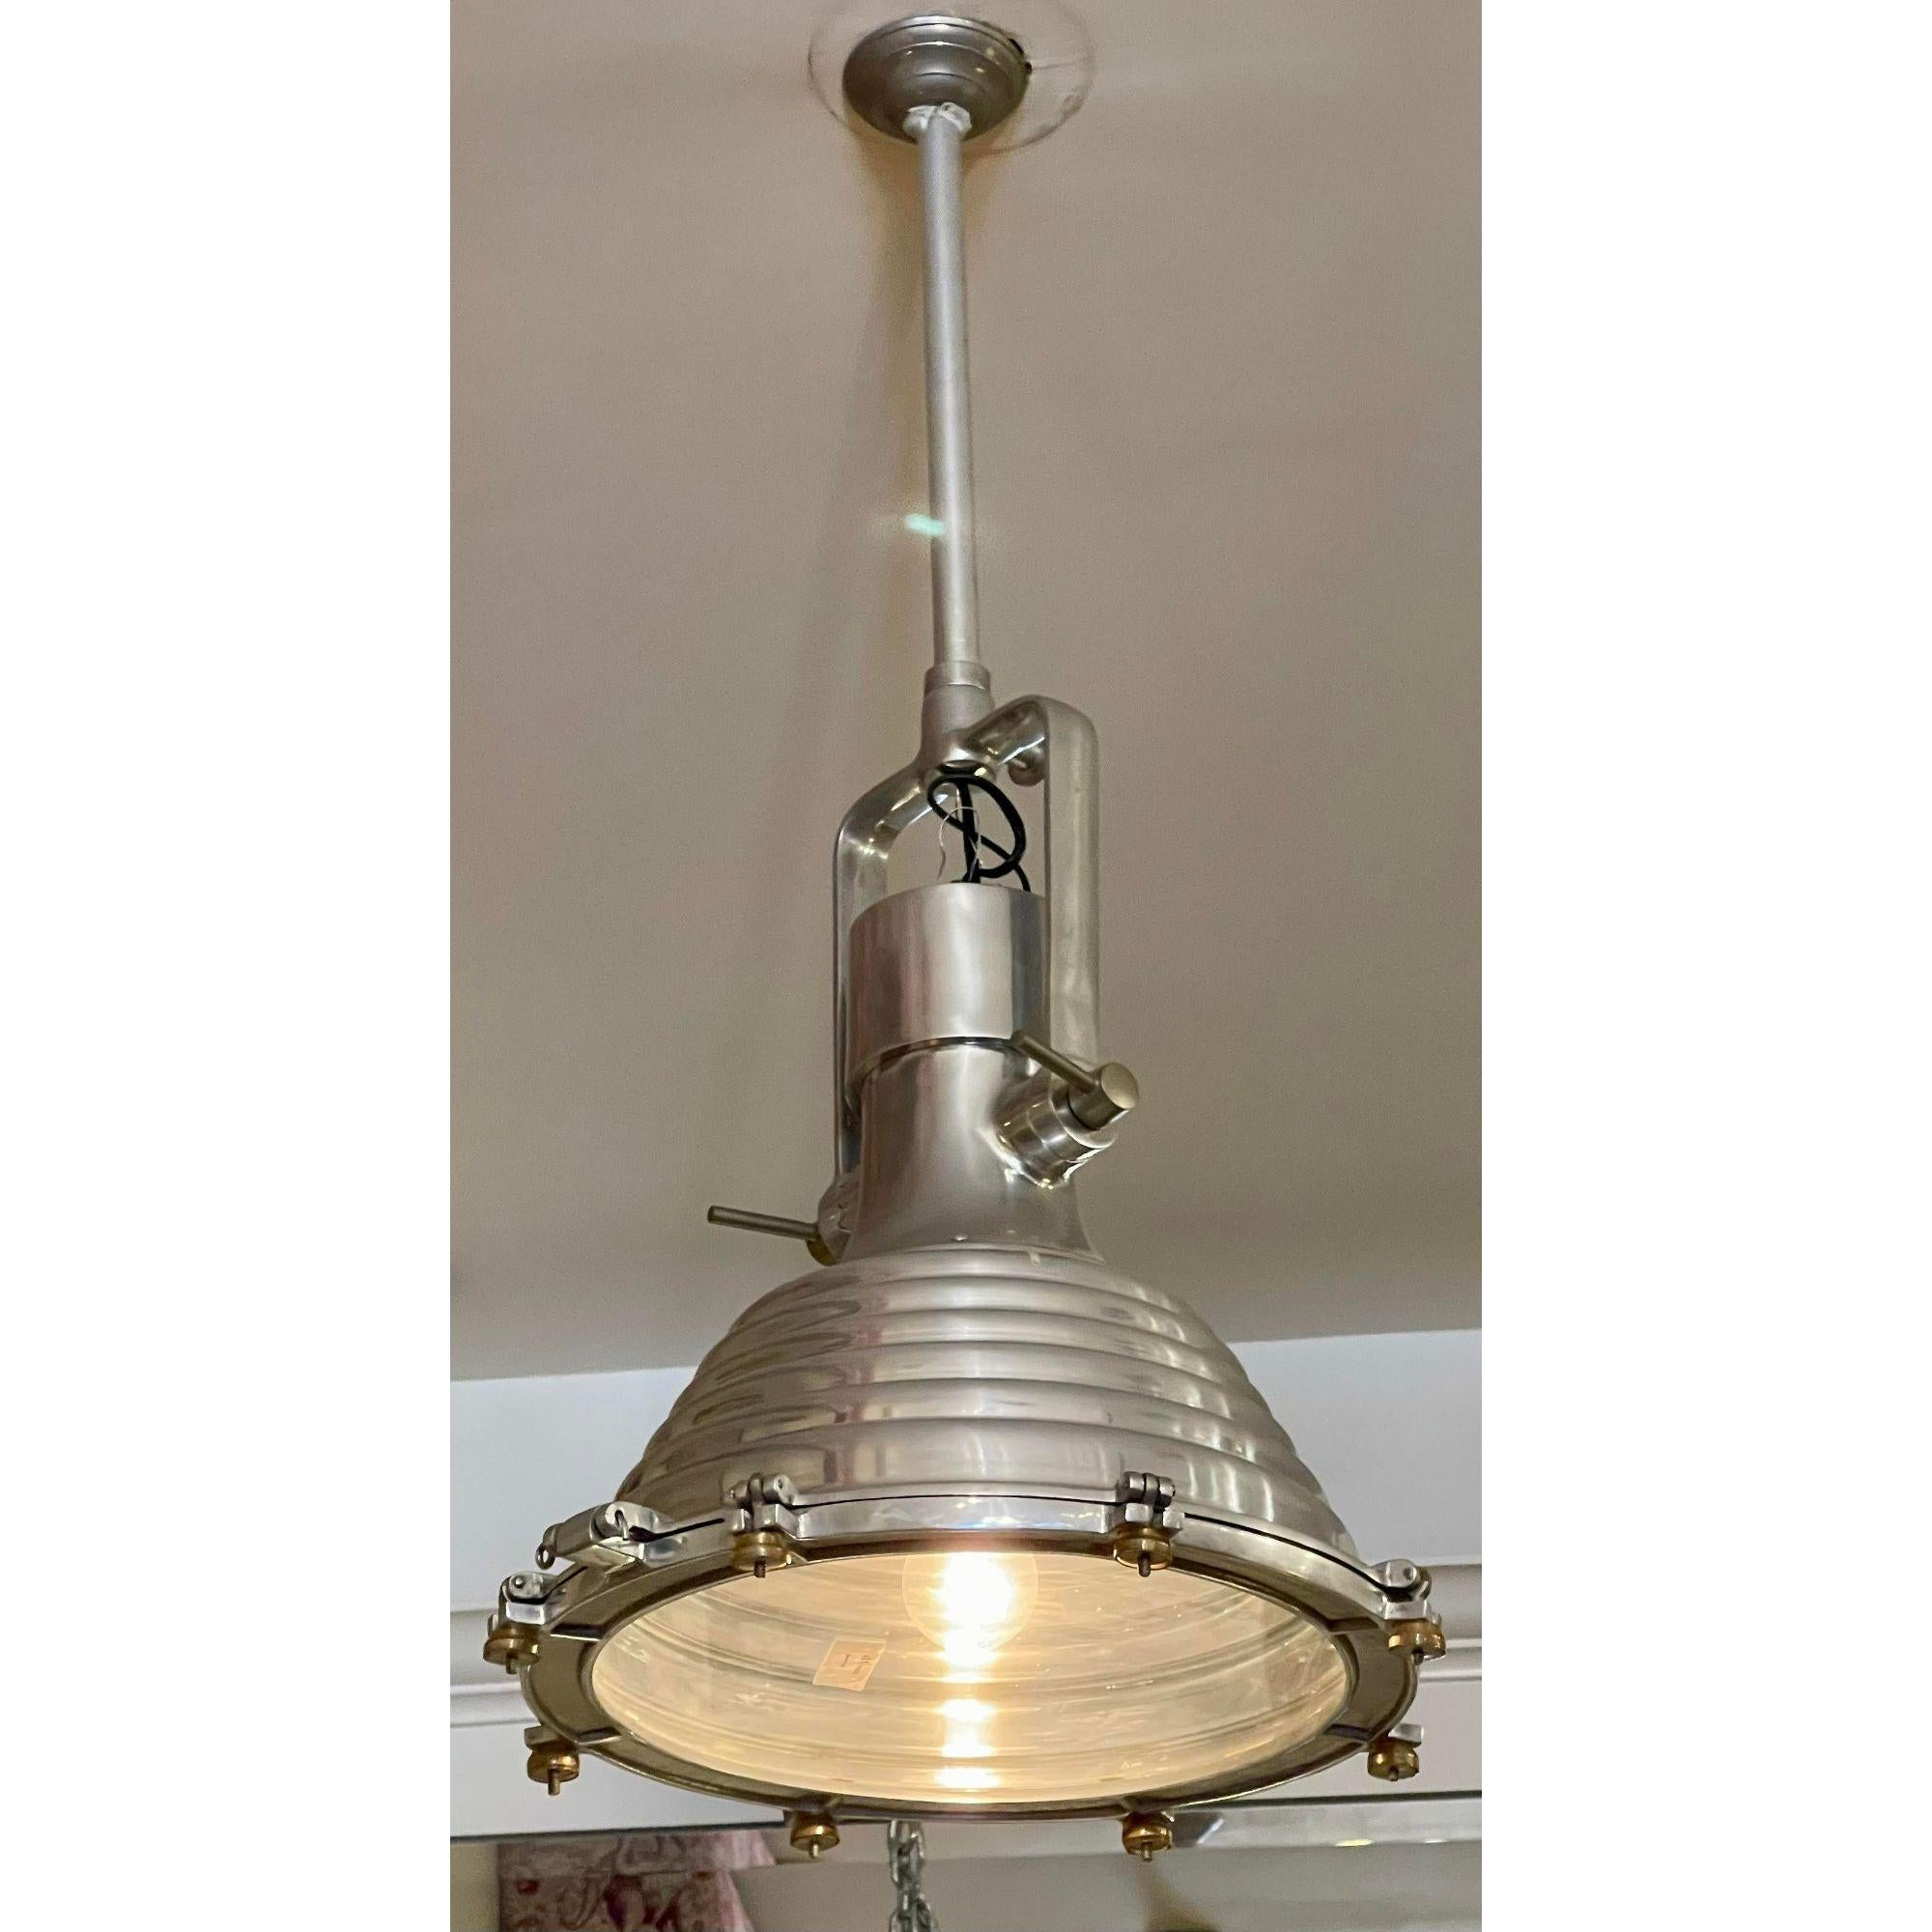 American Industrial Chic Nautical Pendant Light Fixture For Sale